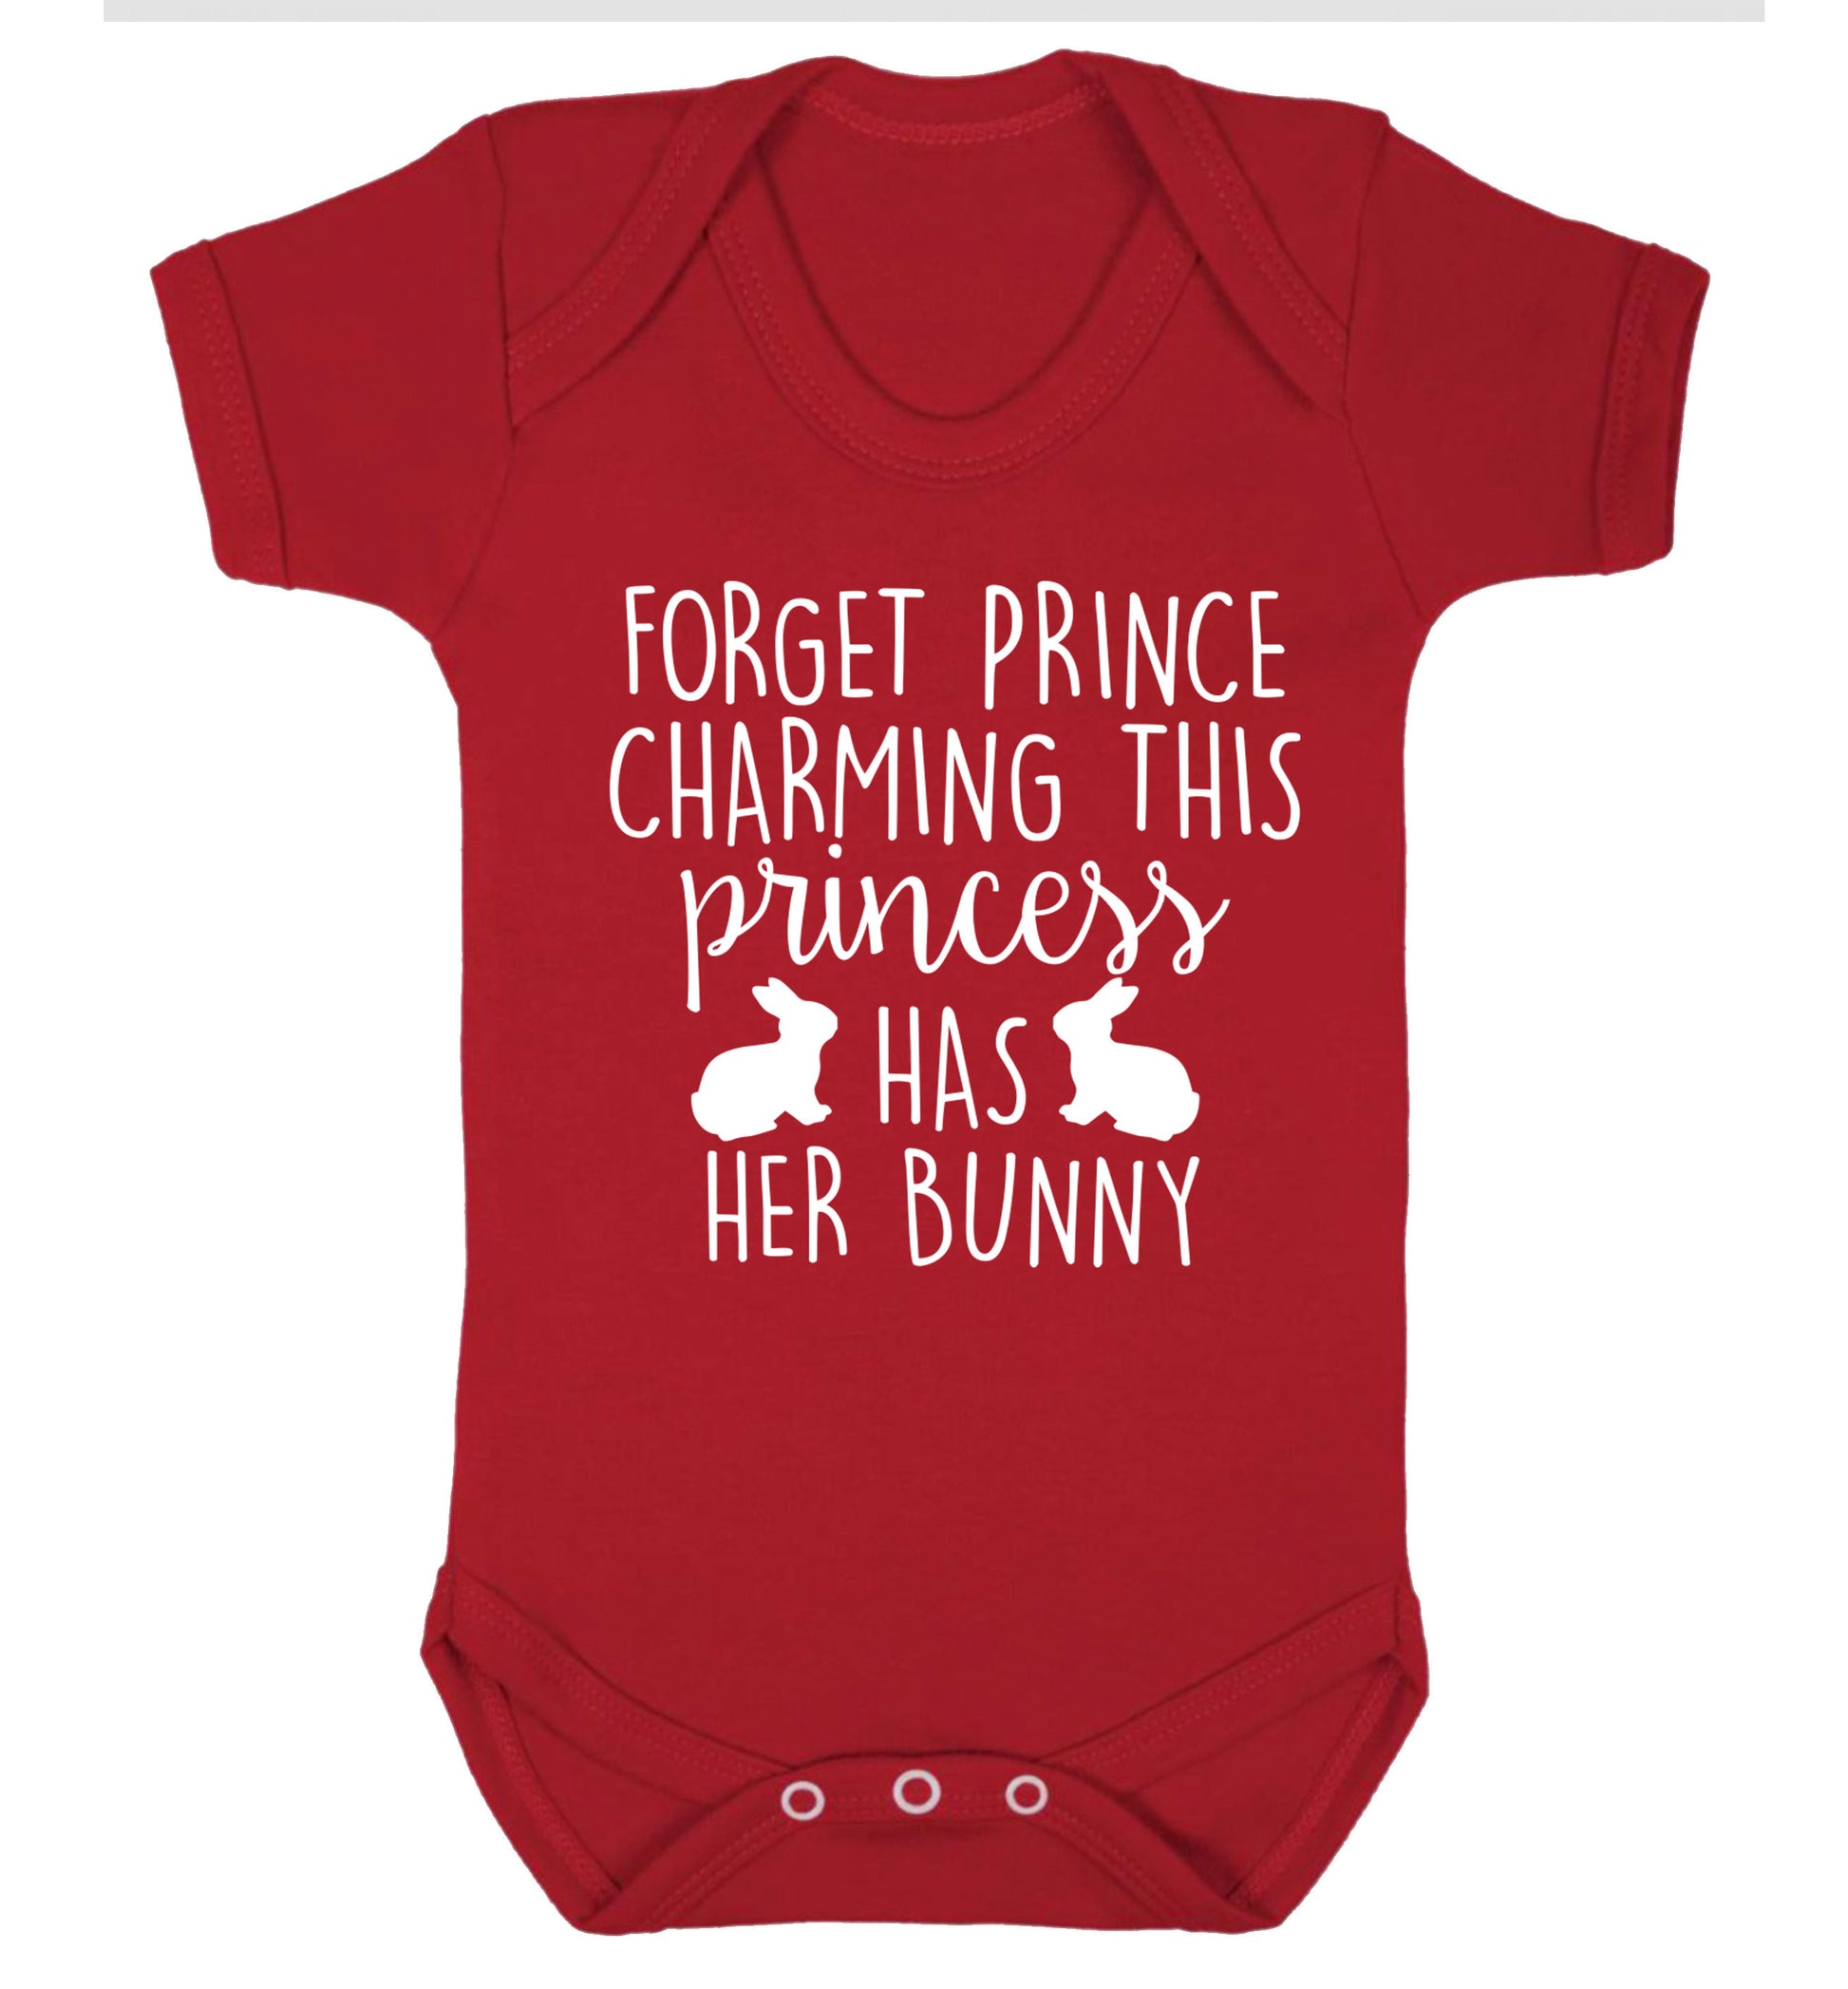 Forget prince charming this princess has her bunny Baby Vest red 18-24 months